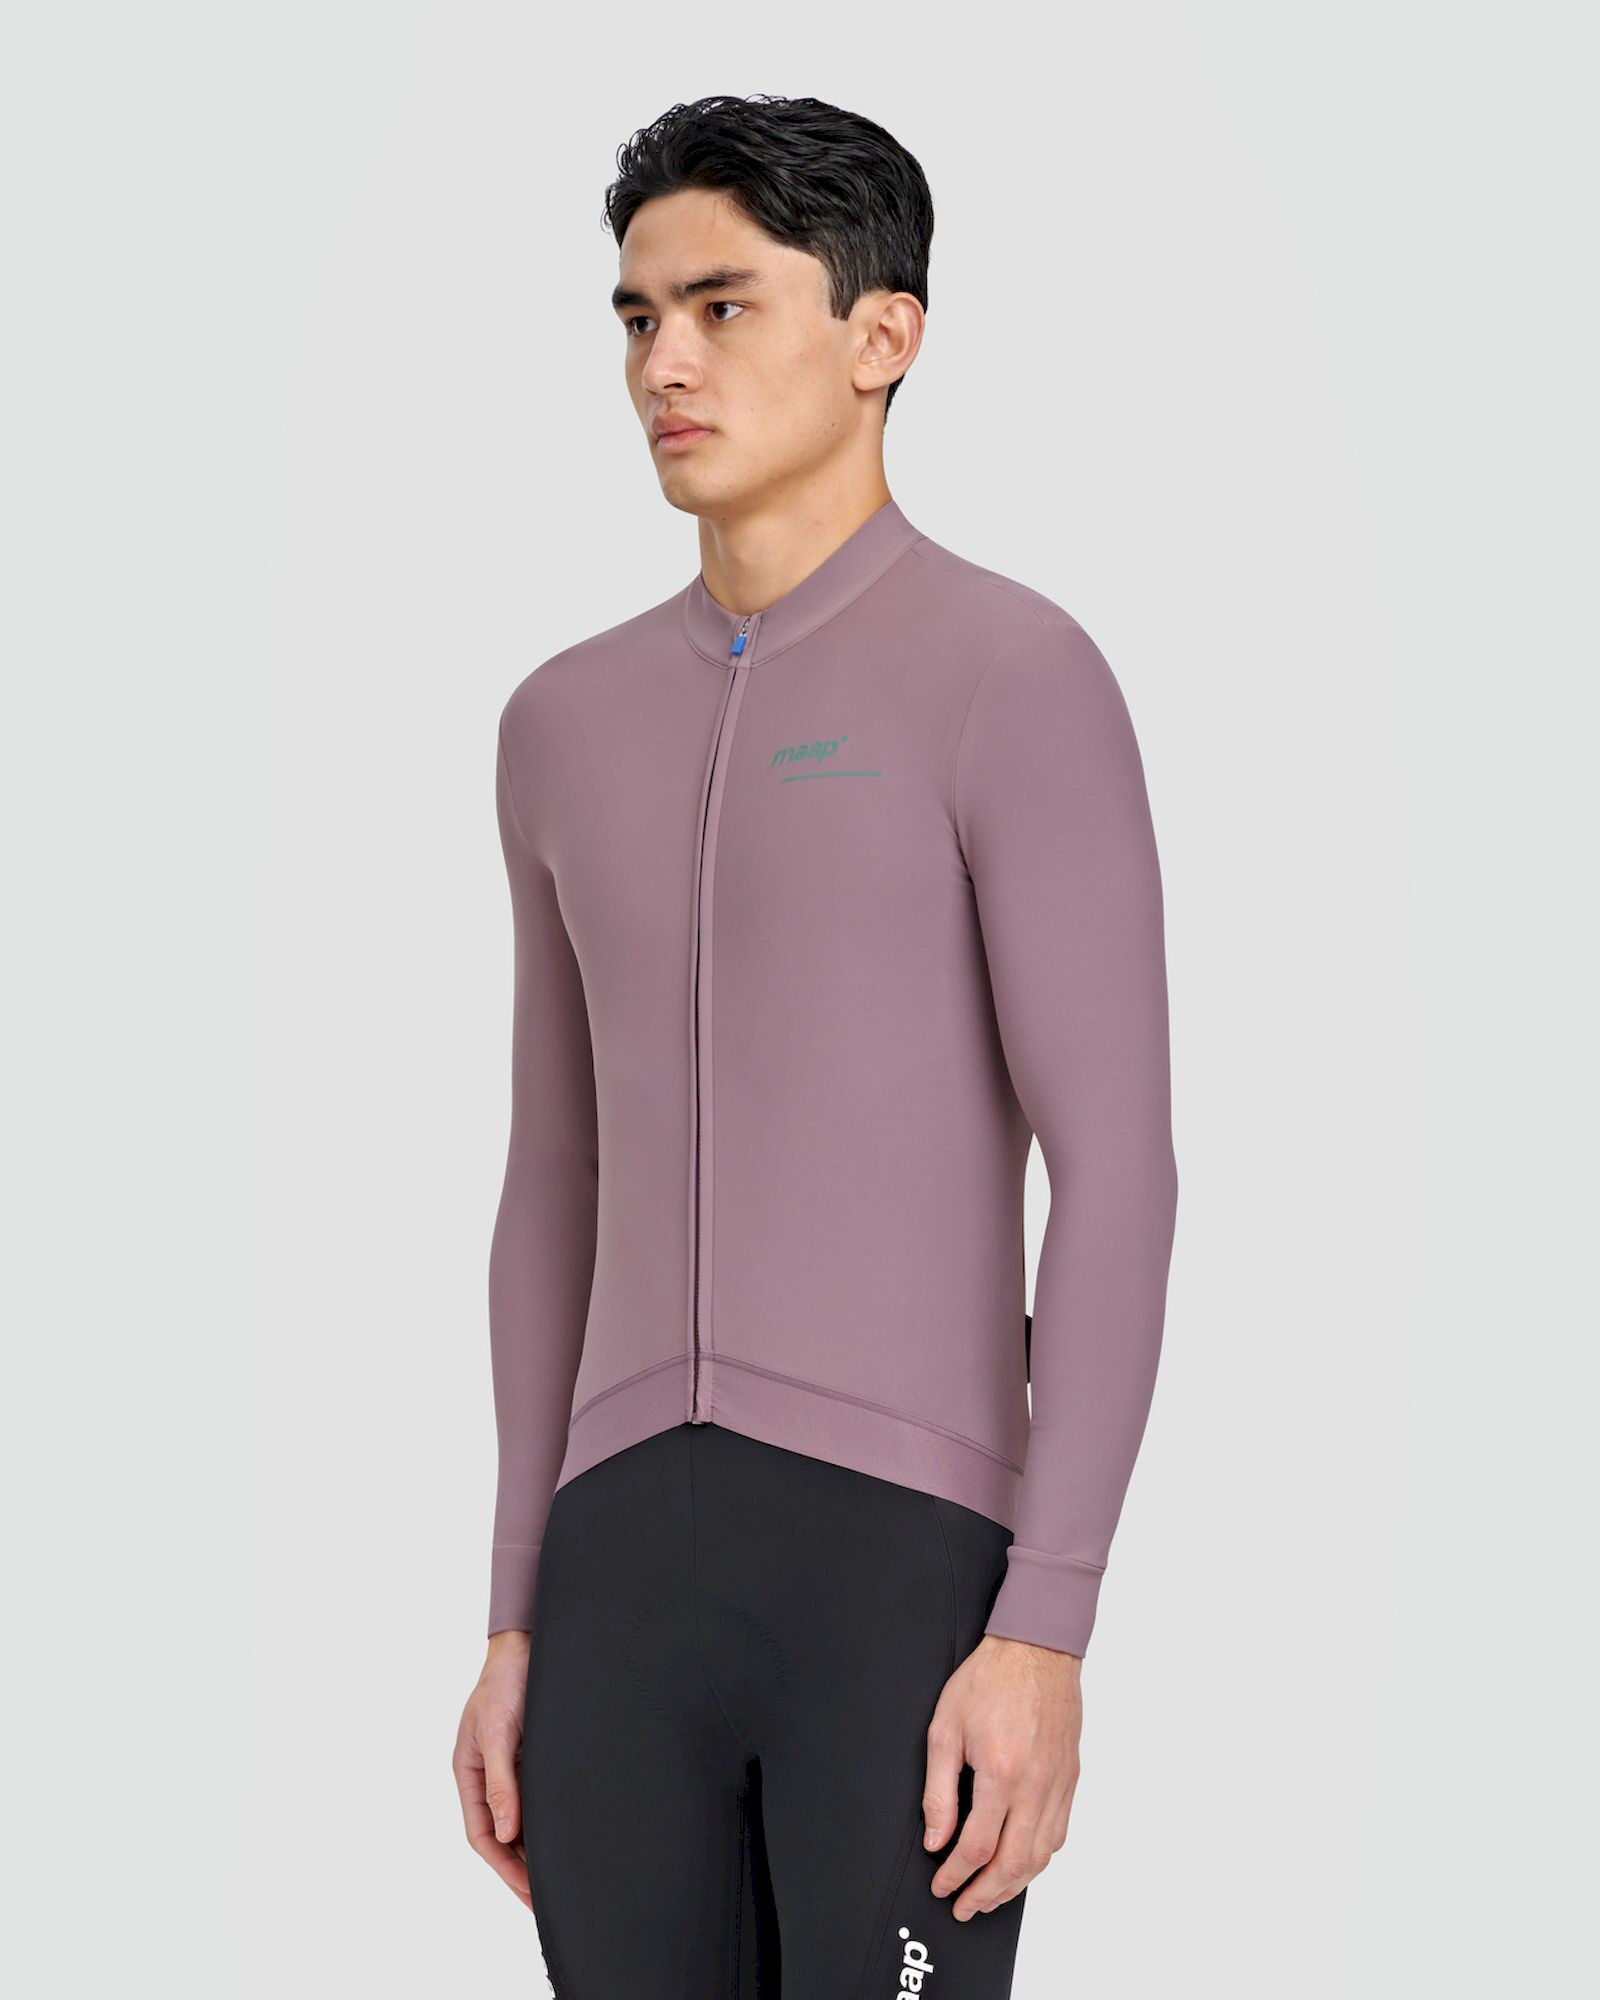 Maap Training Thermal LS Jersey - Maillot ciclismo - Hombre | Hardloop